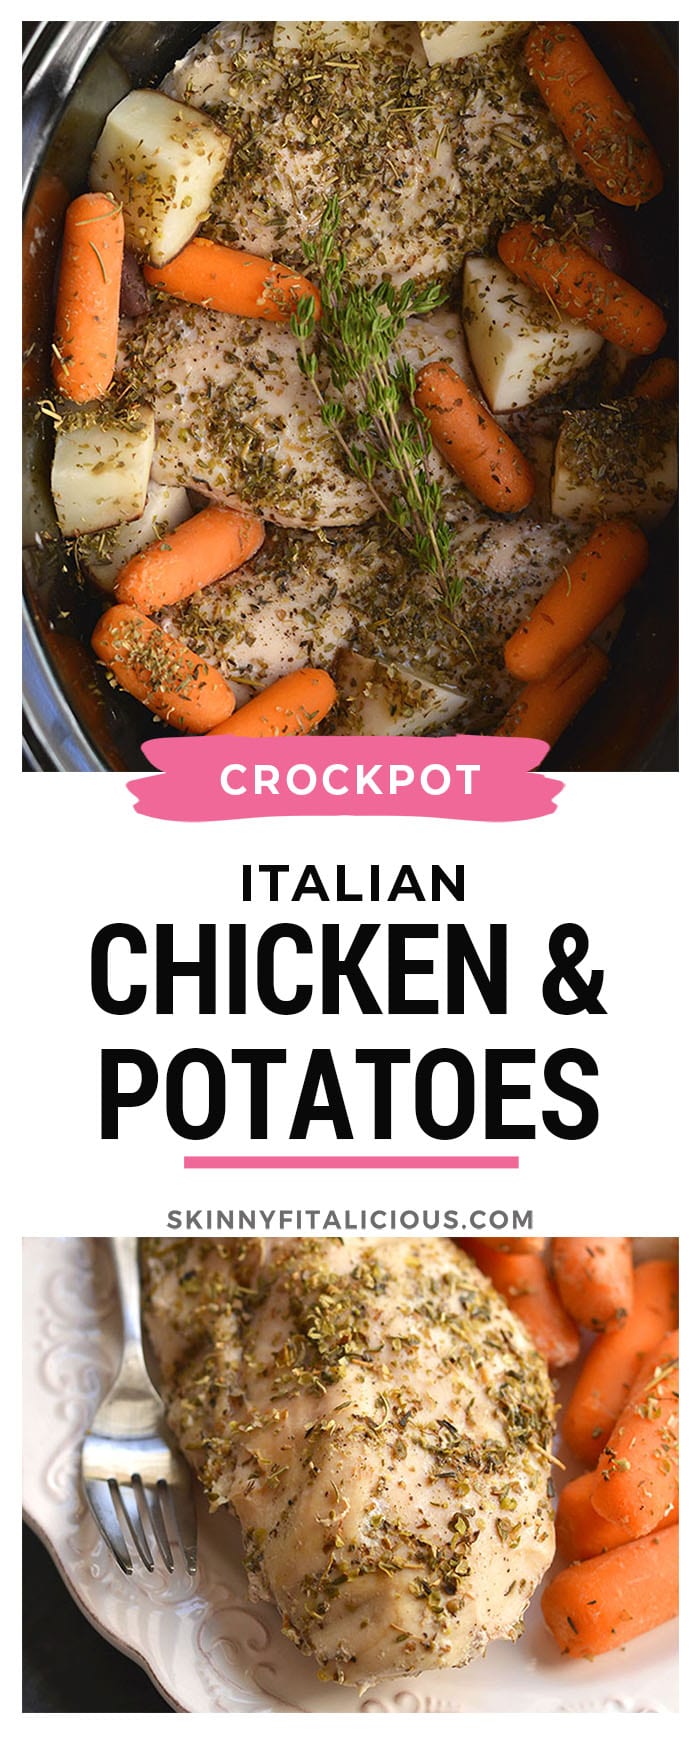 Chicken, Carrots & Potatoes made in a slow cooker! This Crockpot Italian Chicken & Potatoes makes the most tender chicken. An EASY, 5-ingredient dinner packed with flavor that will satisfy the whole family! Gluten Free + Paleo + Low Calorie